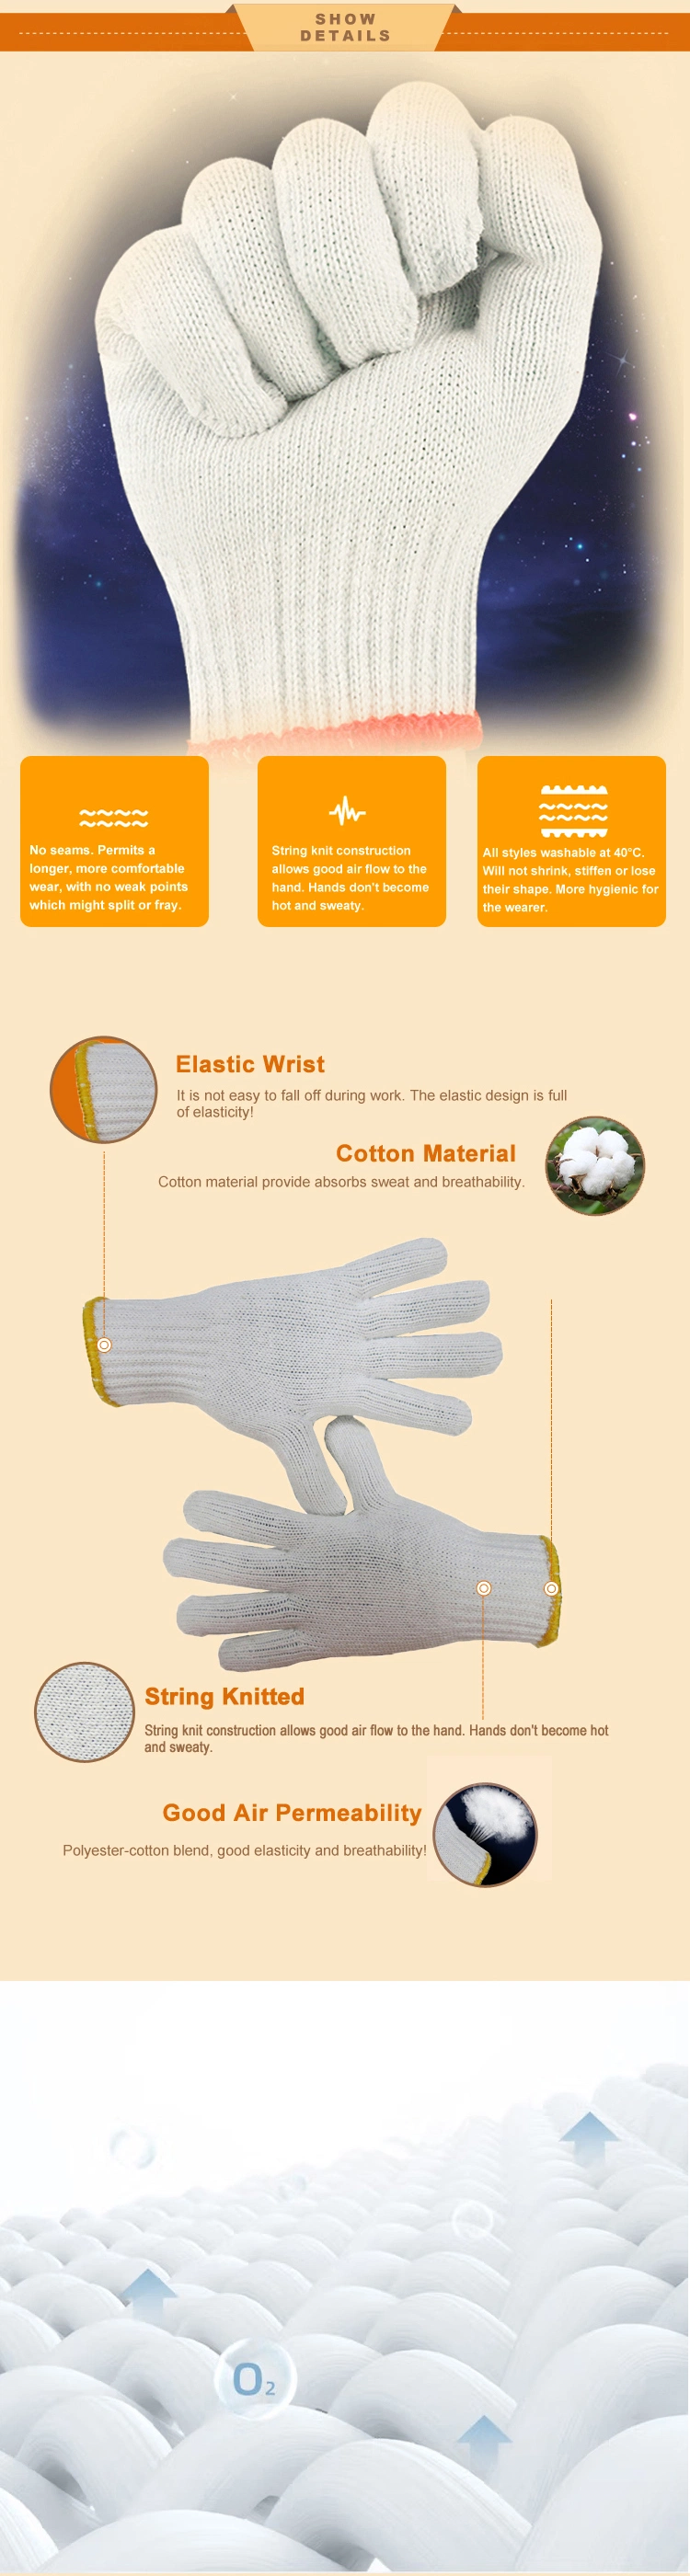 White Cotton Safety Working, Cotton Knit for Men Women, Utility, Construction, Gardening, Fishing, Winter Indoor Outdoor Use